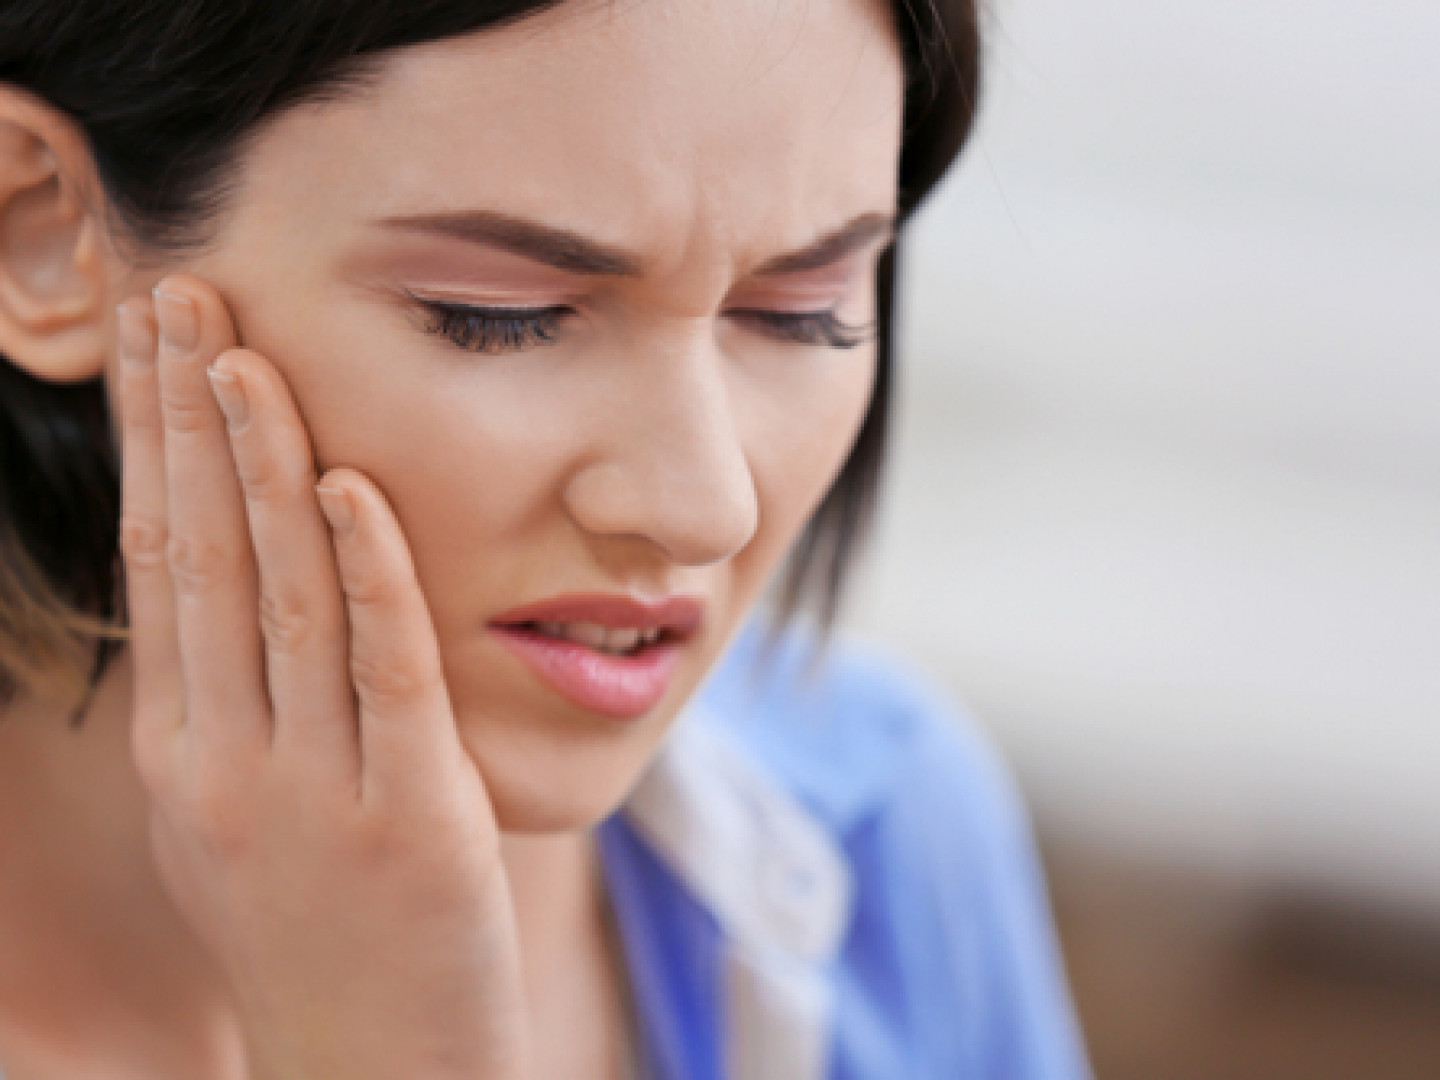 Are You Experiencing Complications After a Dental Procedure?